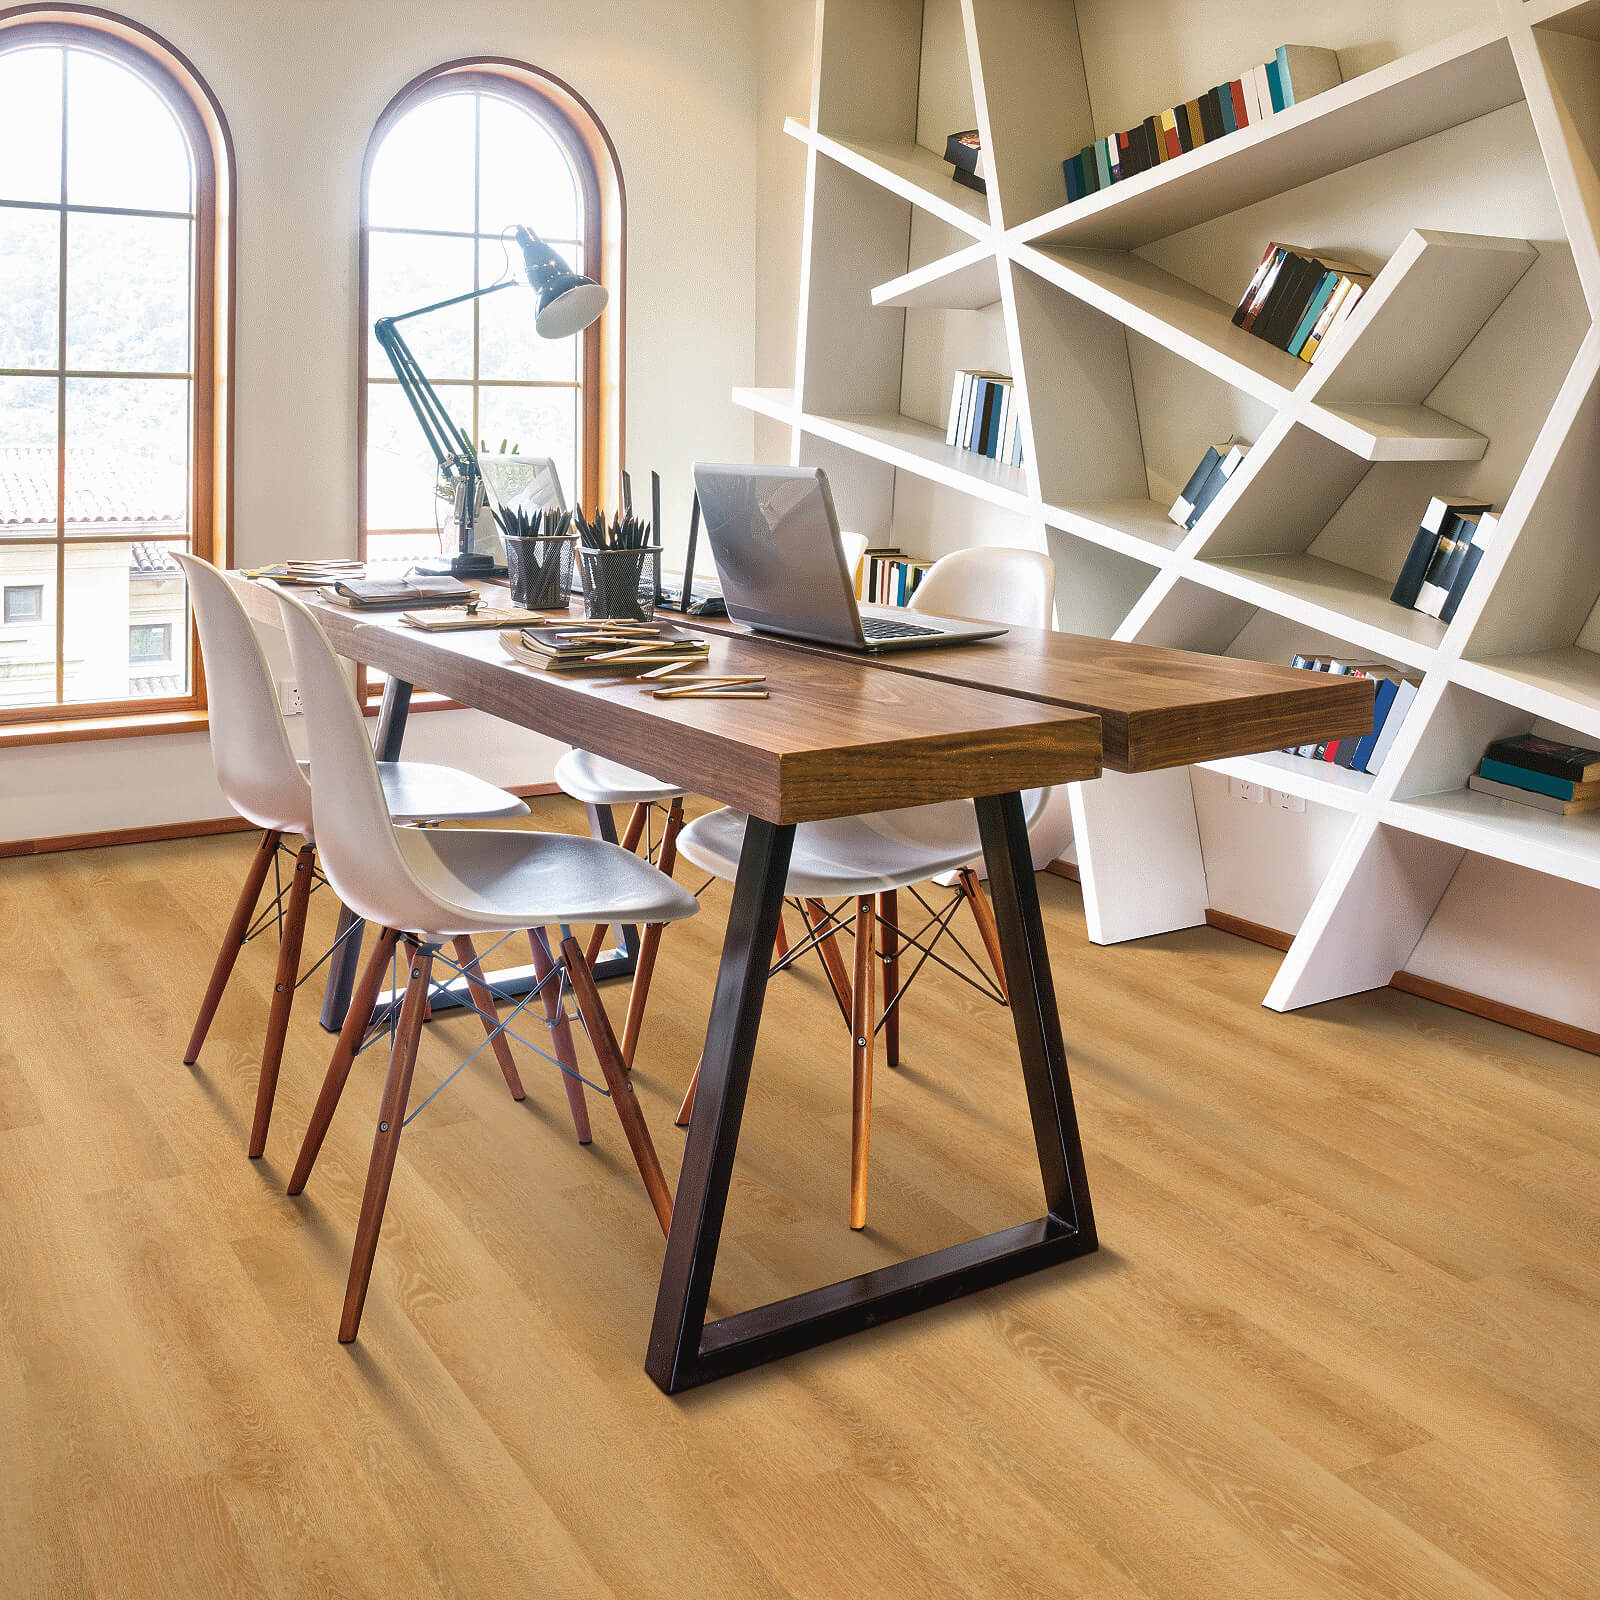 Vinyl flooring for study room | Cleveland Carpets and Floors